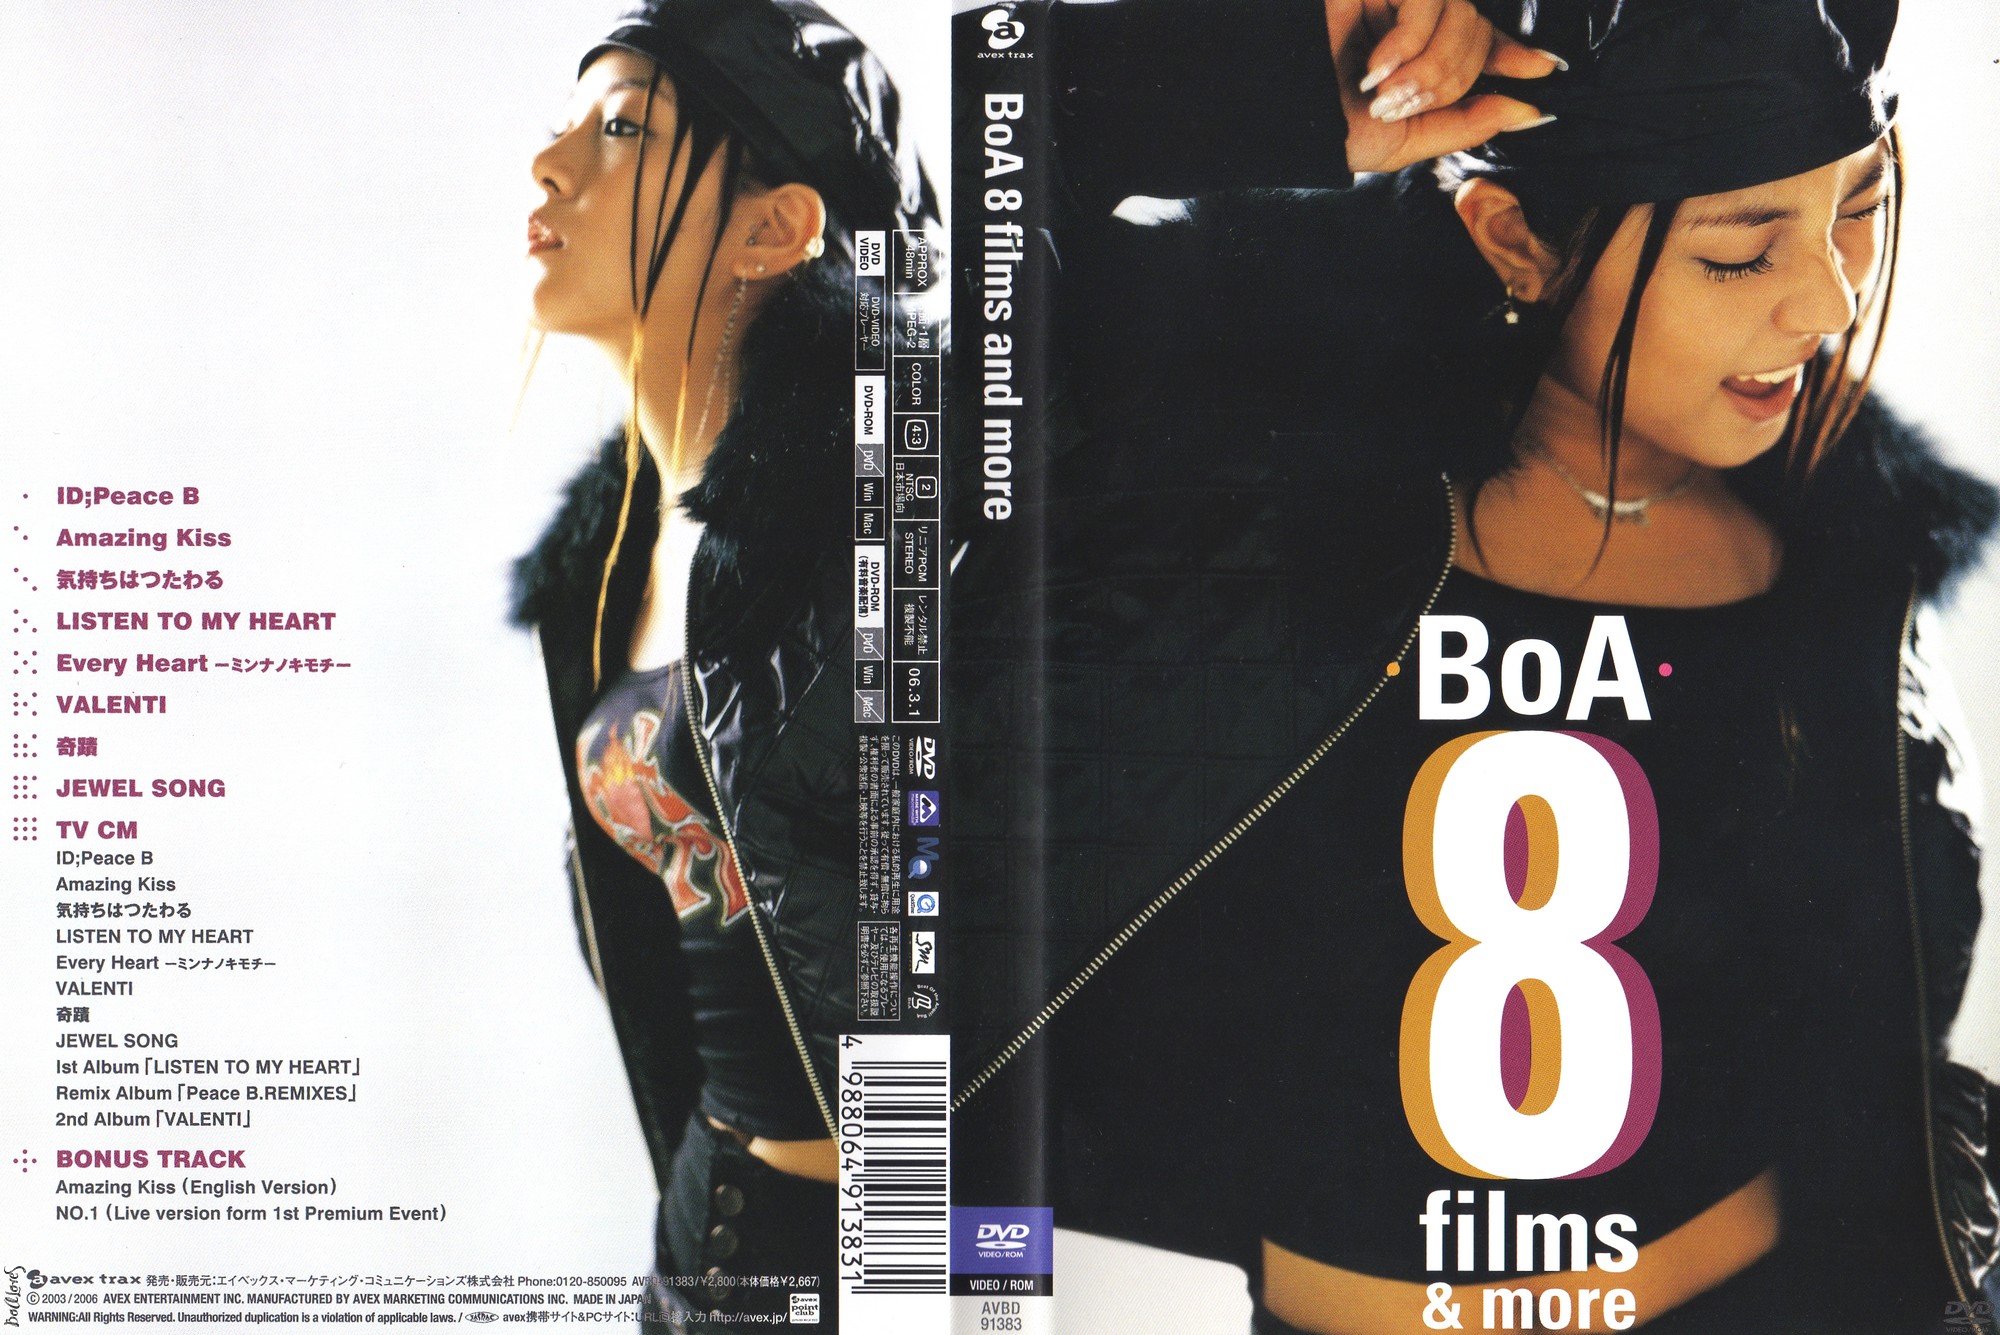 BoA - 8 Films & More Cover Scan